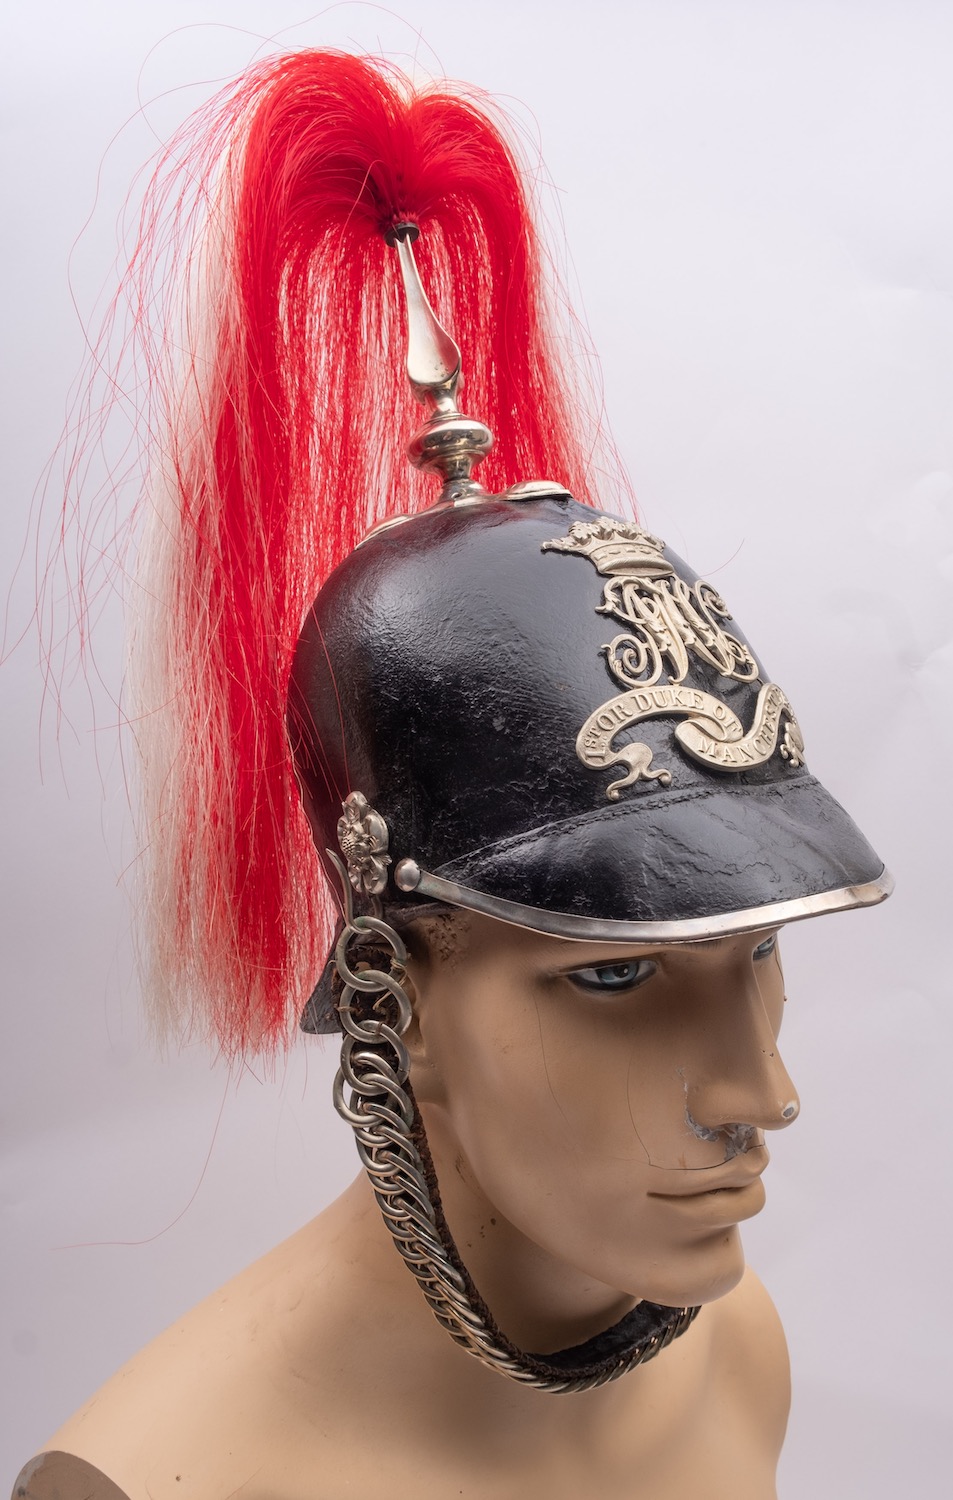 A 1st Duke of Manchester's Cavalry Troopers helmet,